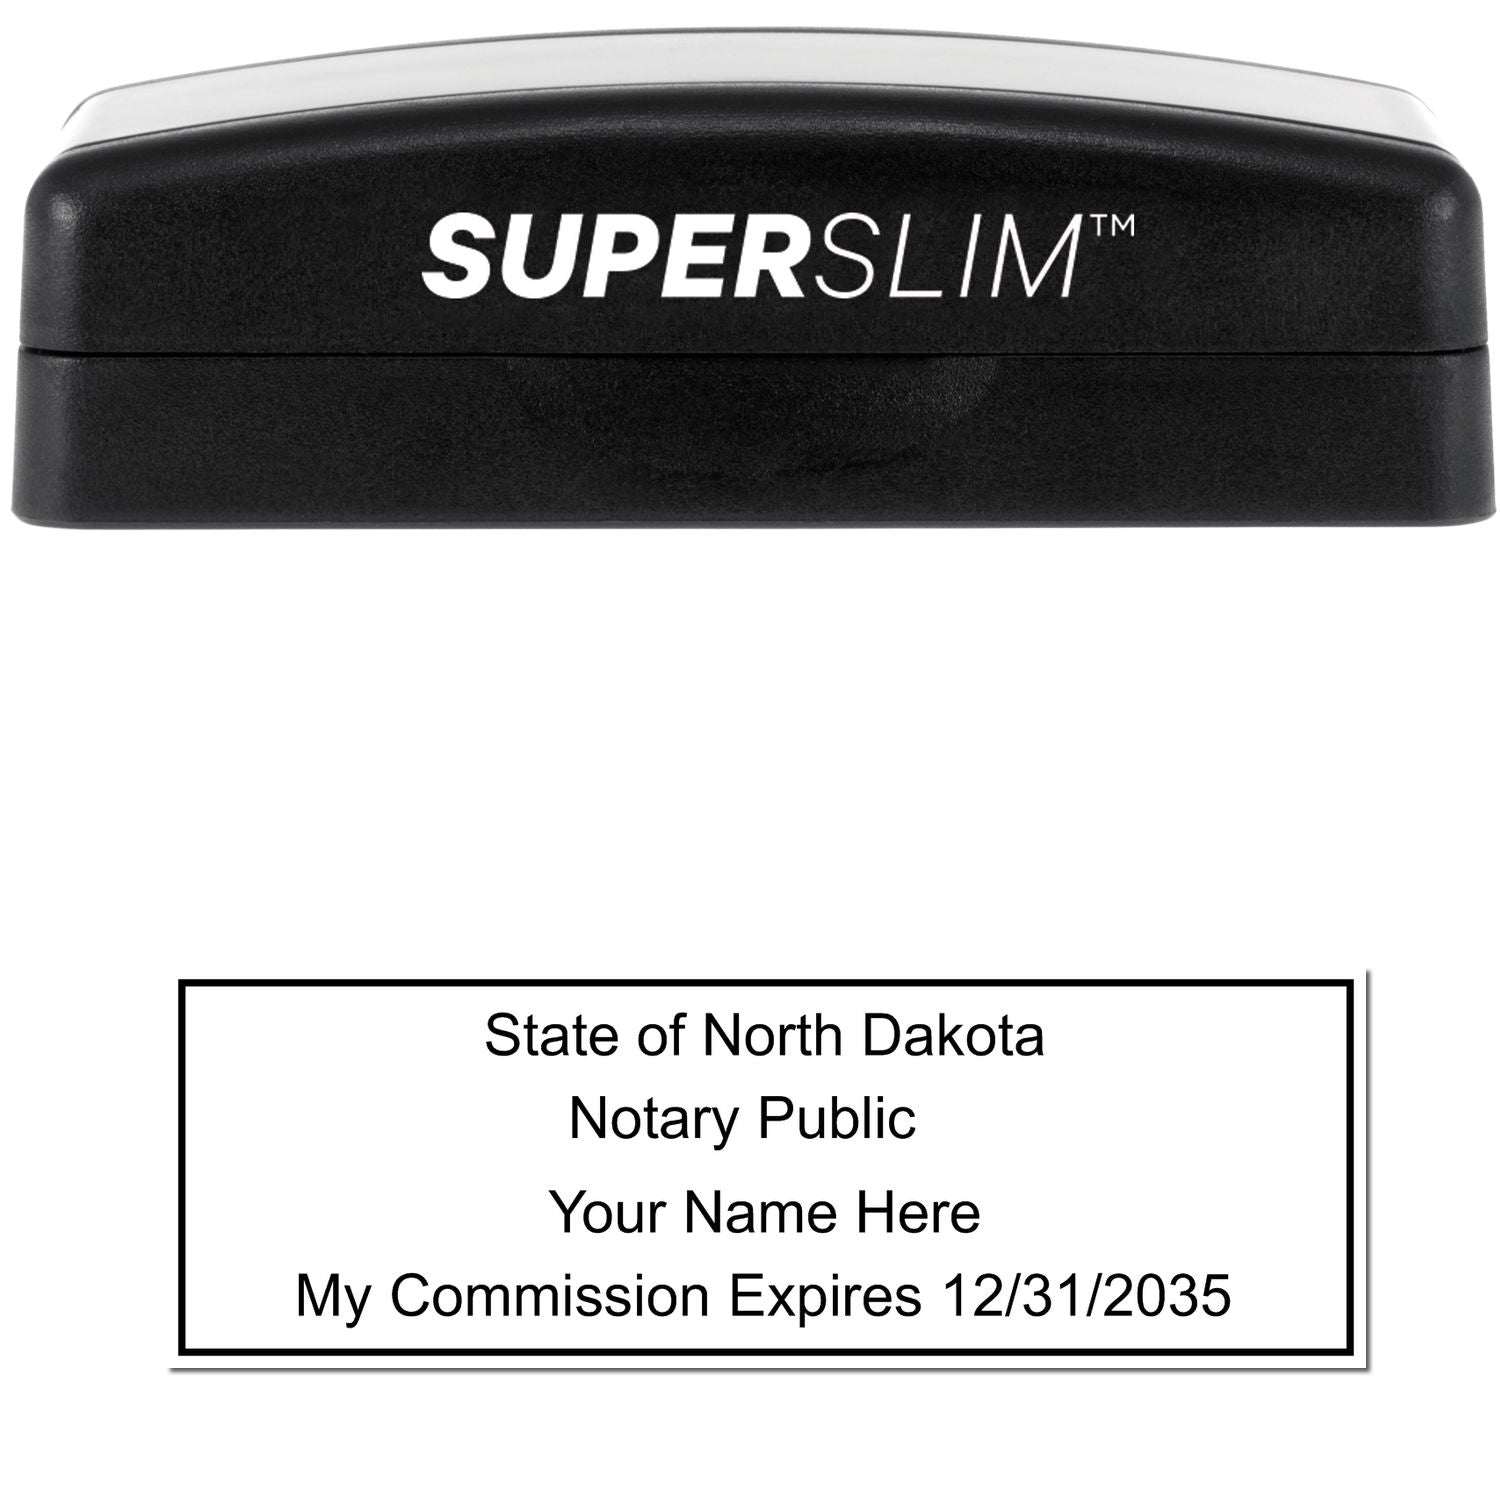 The main image for the Super Slim North Dakota Notary Public Stamp depicting a sample of the imprint and electronic files